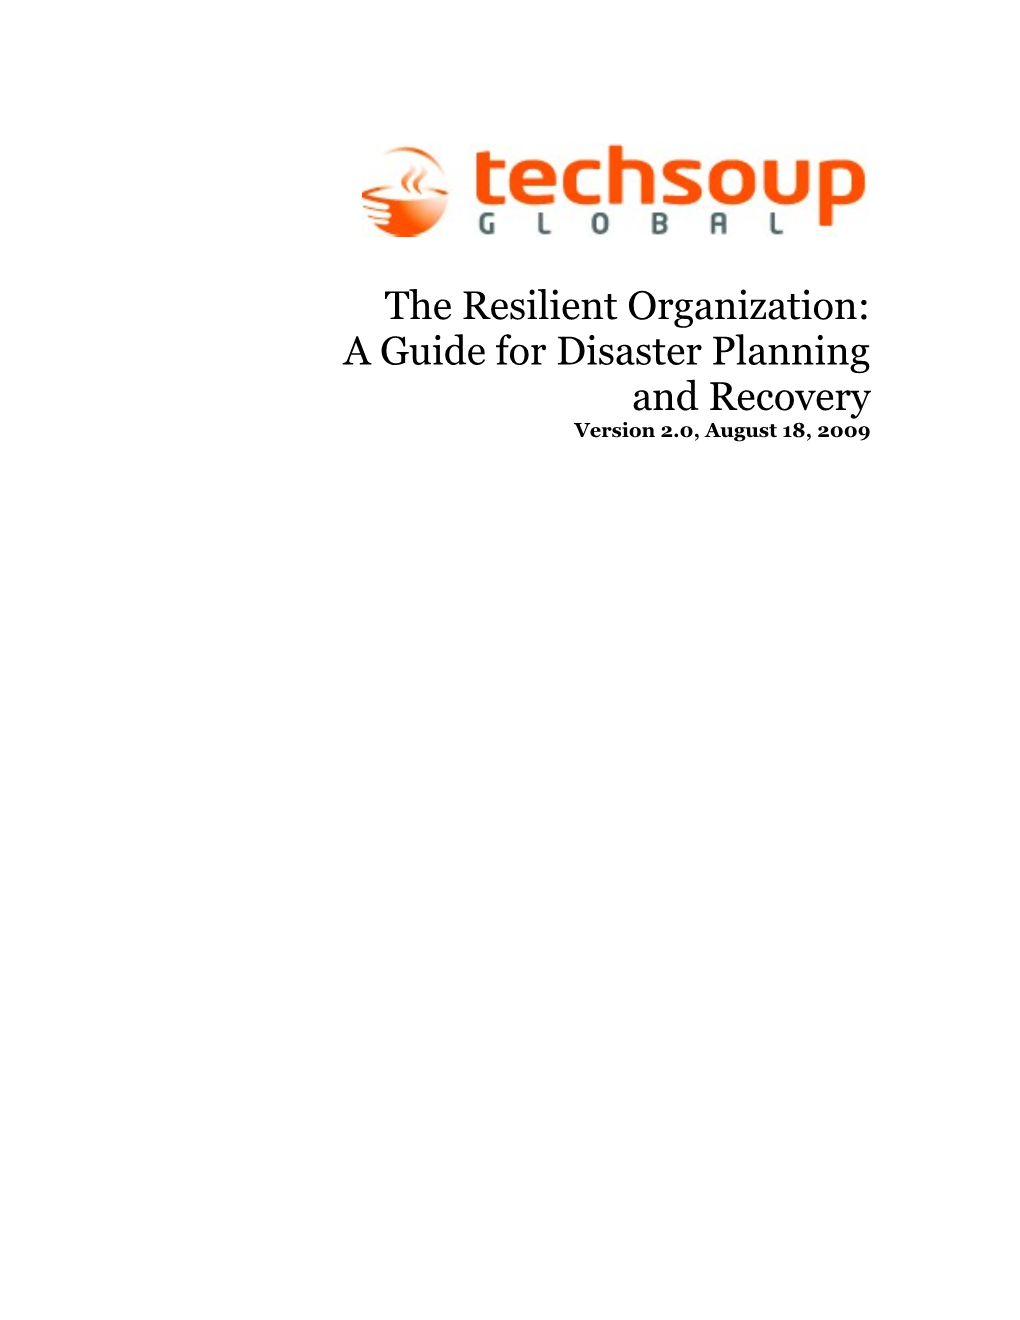 The Resilient Organization: a Guide for Disaster Planning and Recovery, V 2.0 2